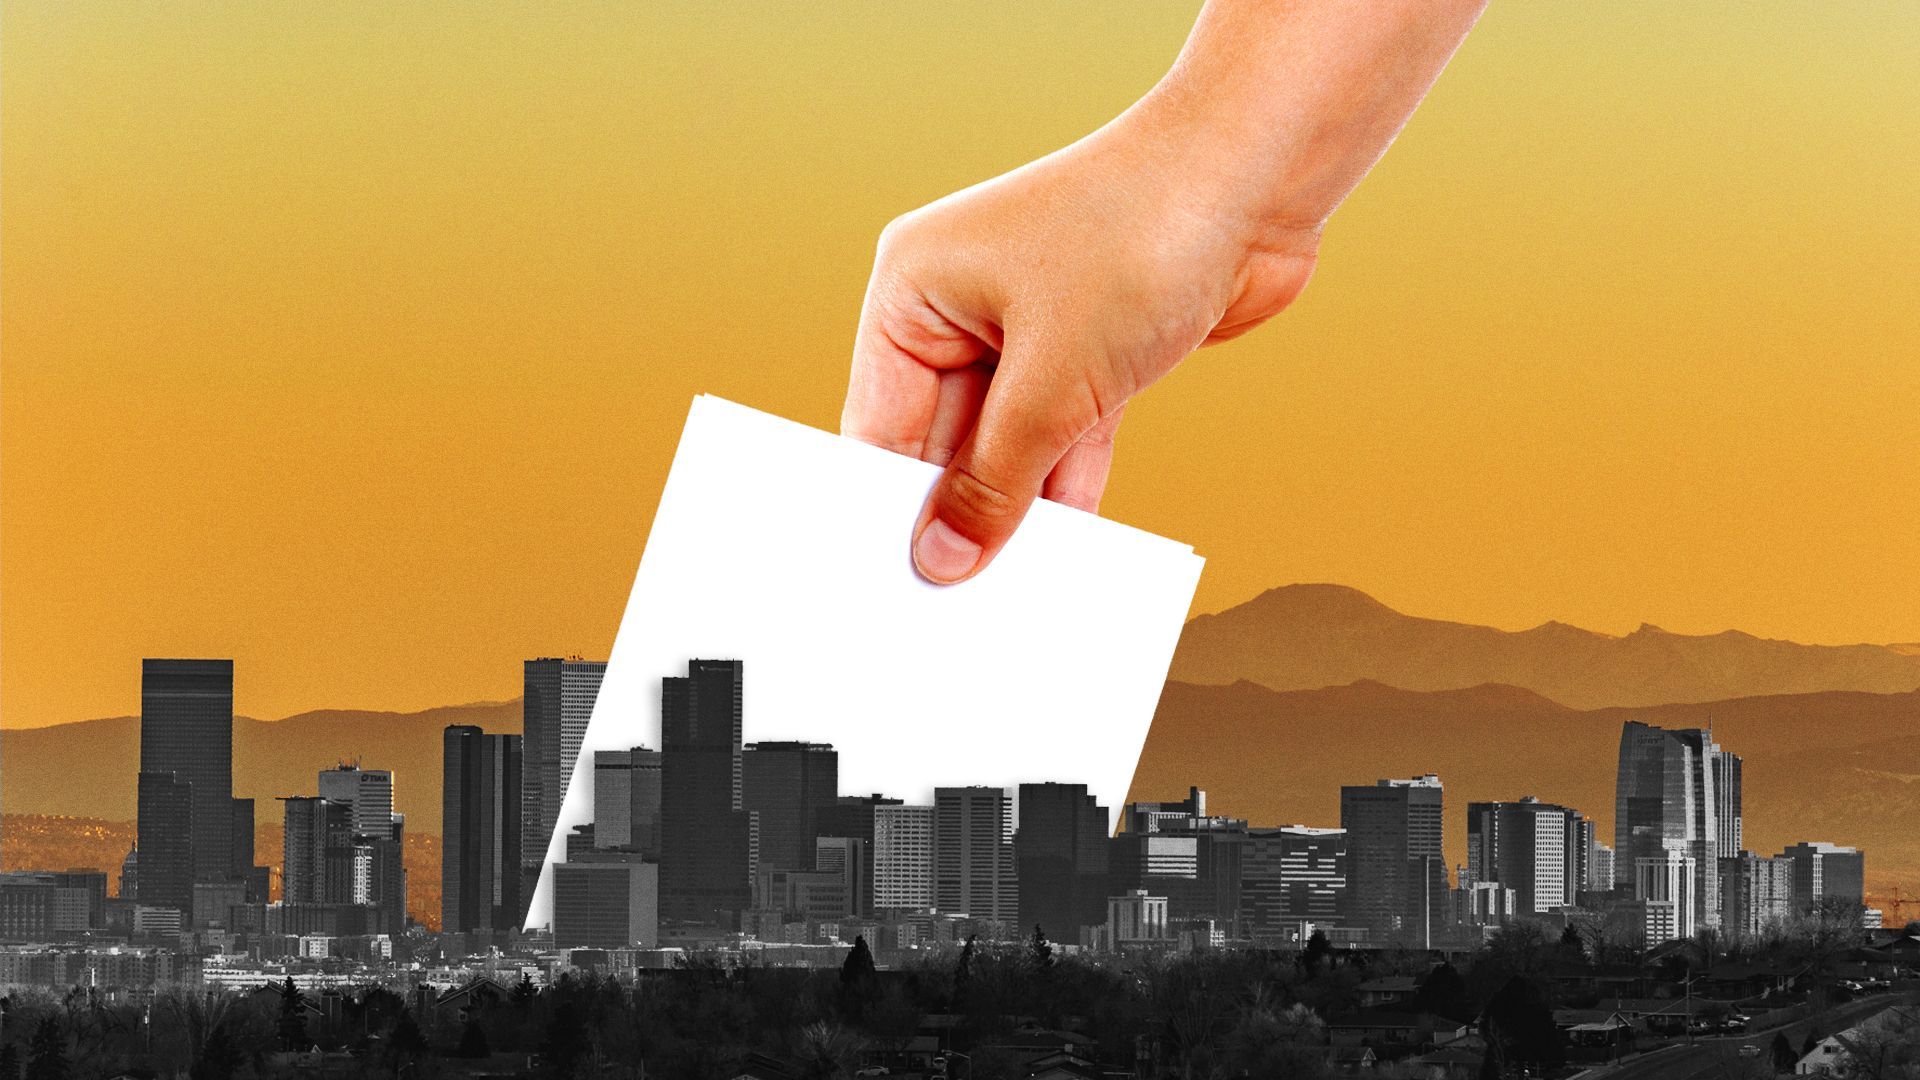 Illustration of a ballot being dropped into the Denver skyline.